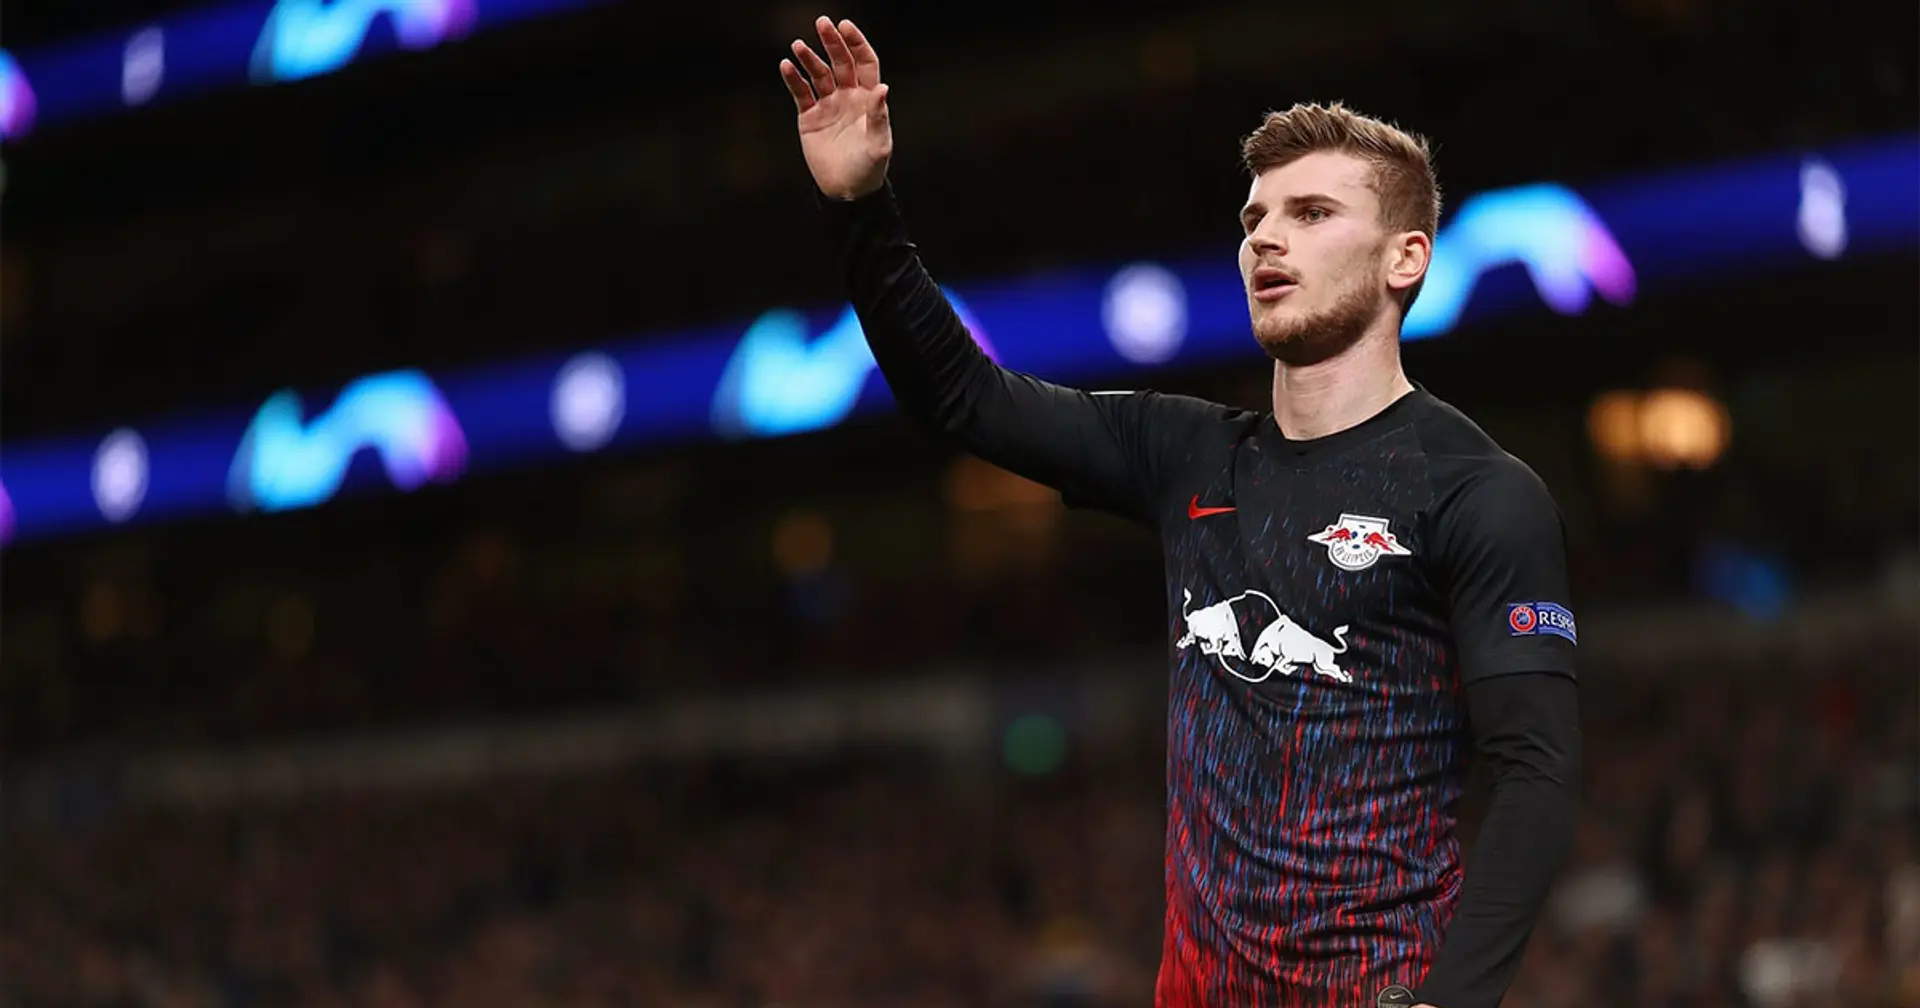 Werner reaches another milestone after goal vs Koln